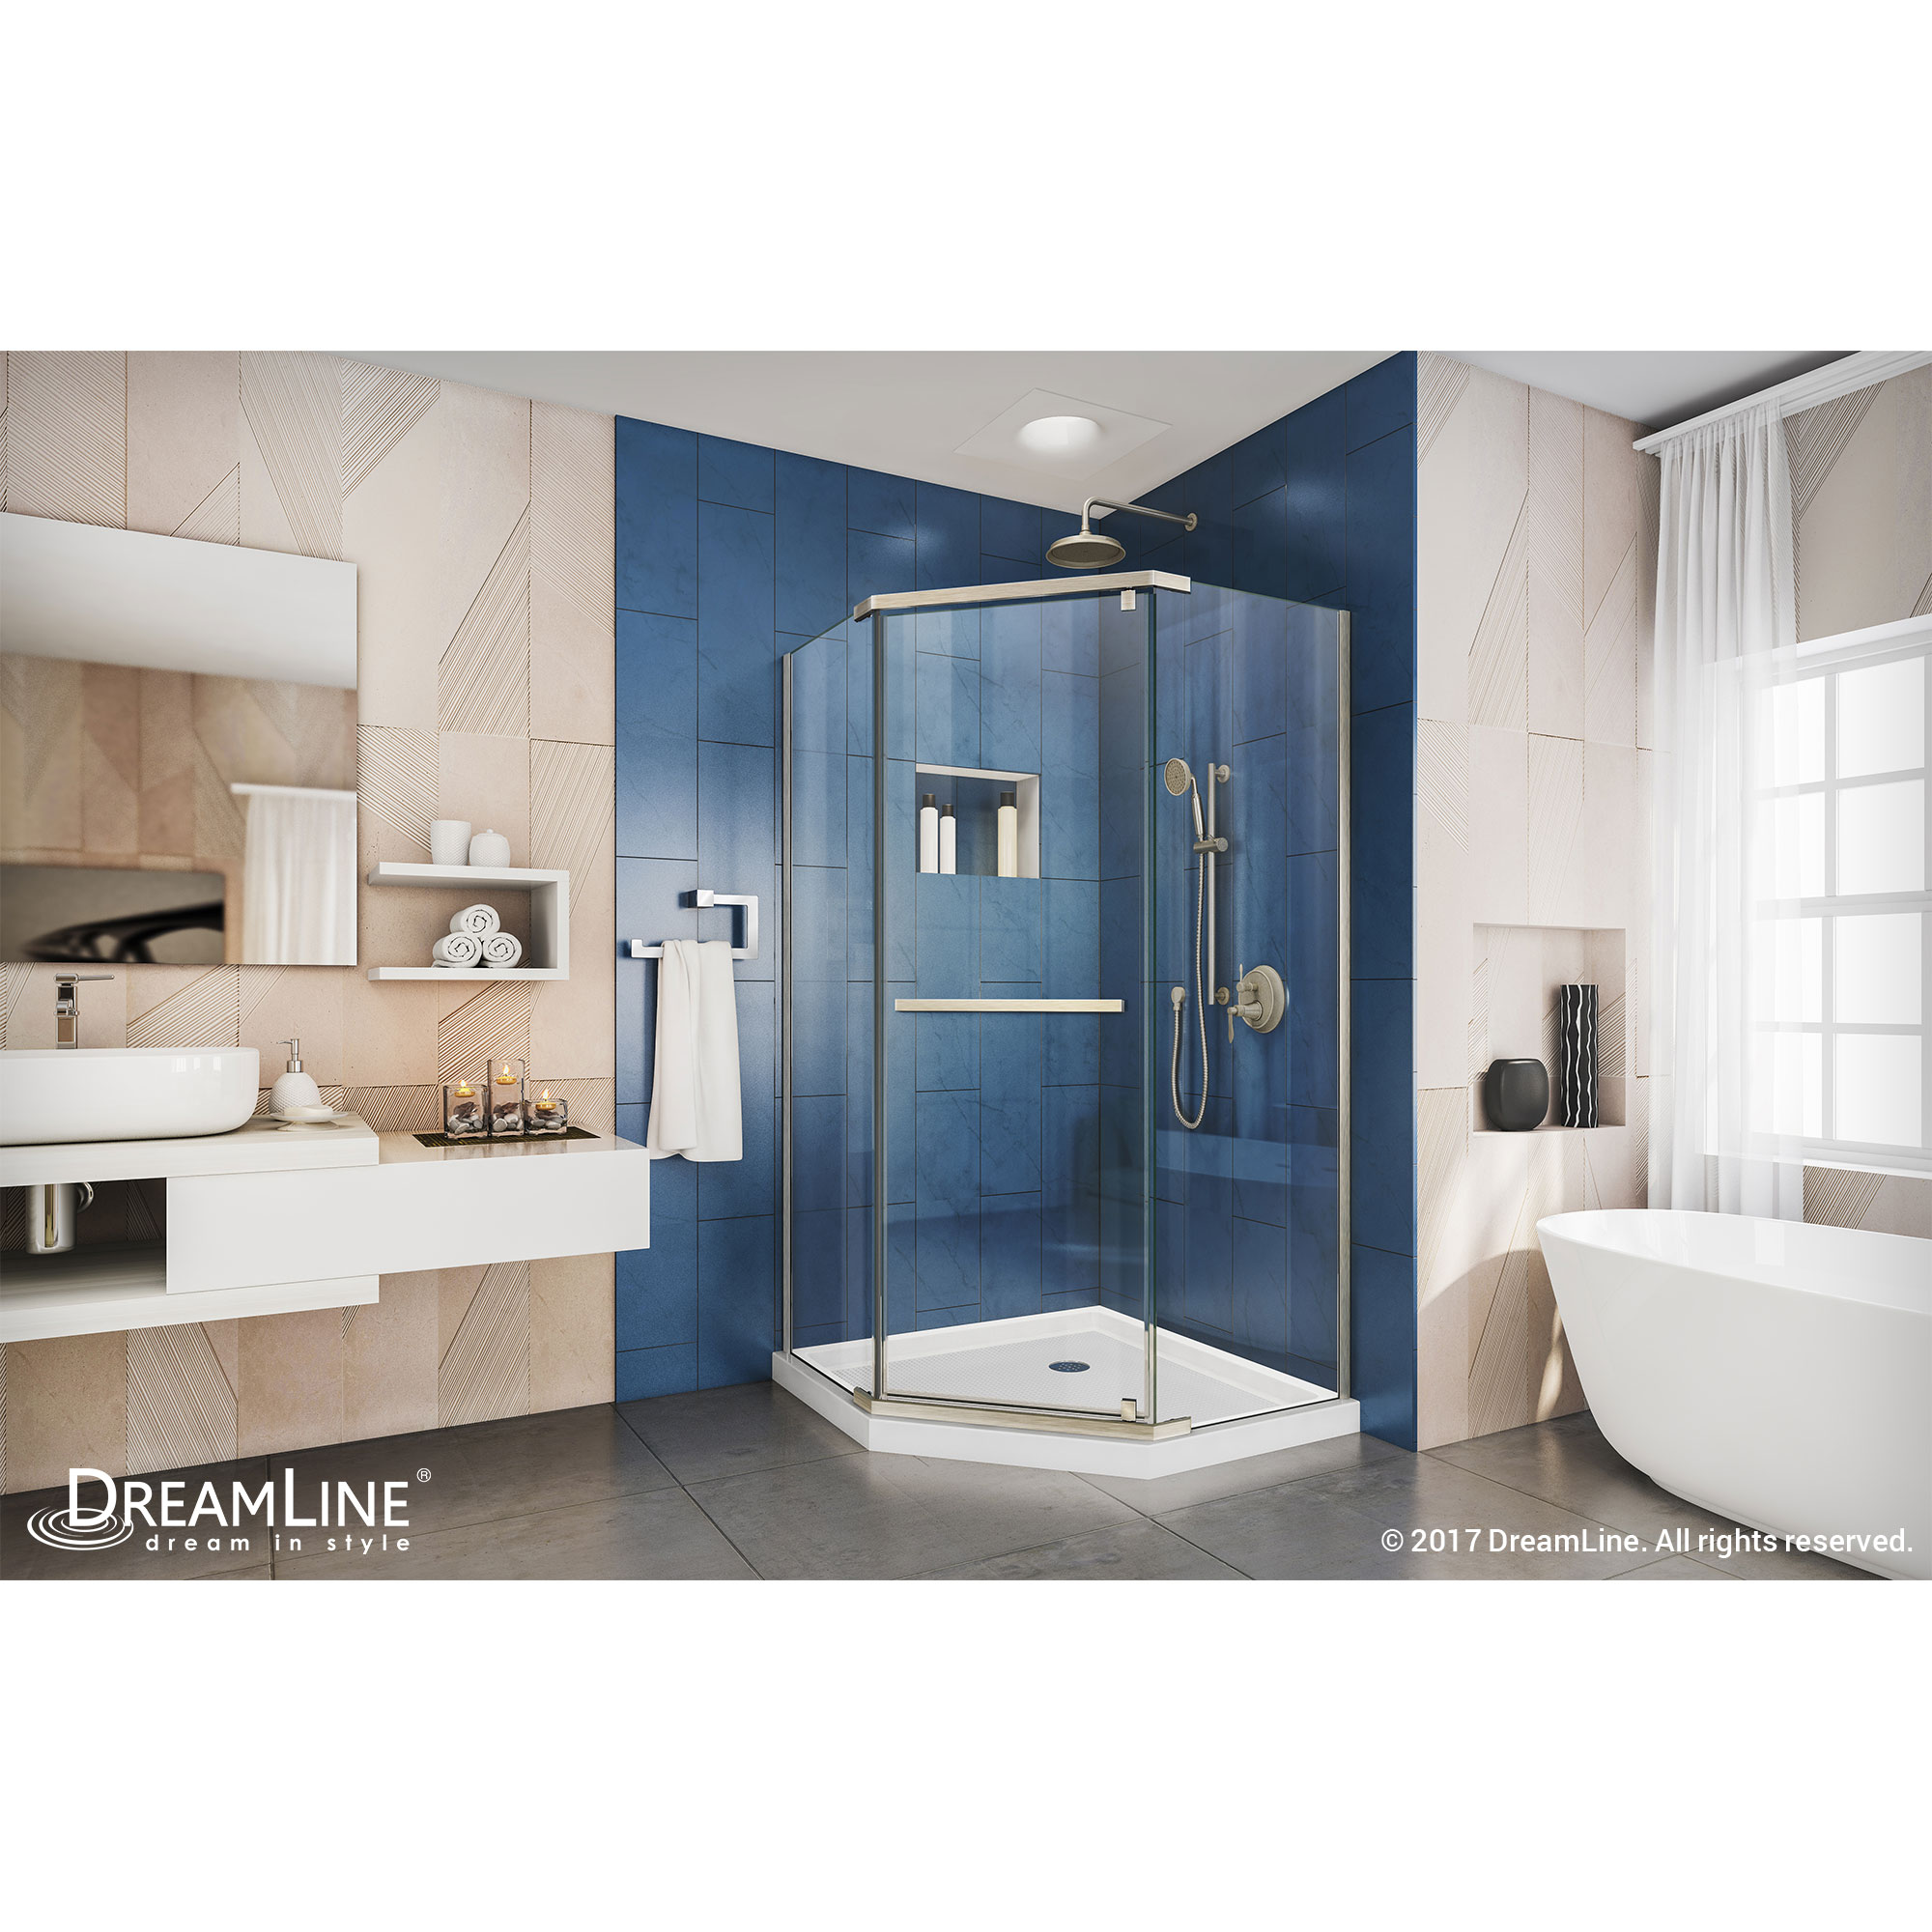 DreamLine Prism 36 in. D x 36 in. W x 74 3/4 H Pivot Shower Enclosure in Brushed Nickel and Corner Drain White Base Kit